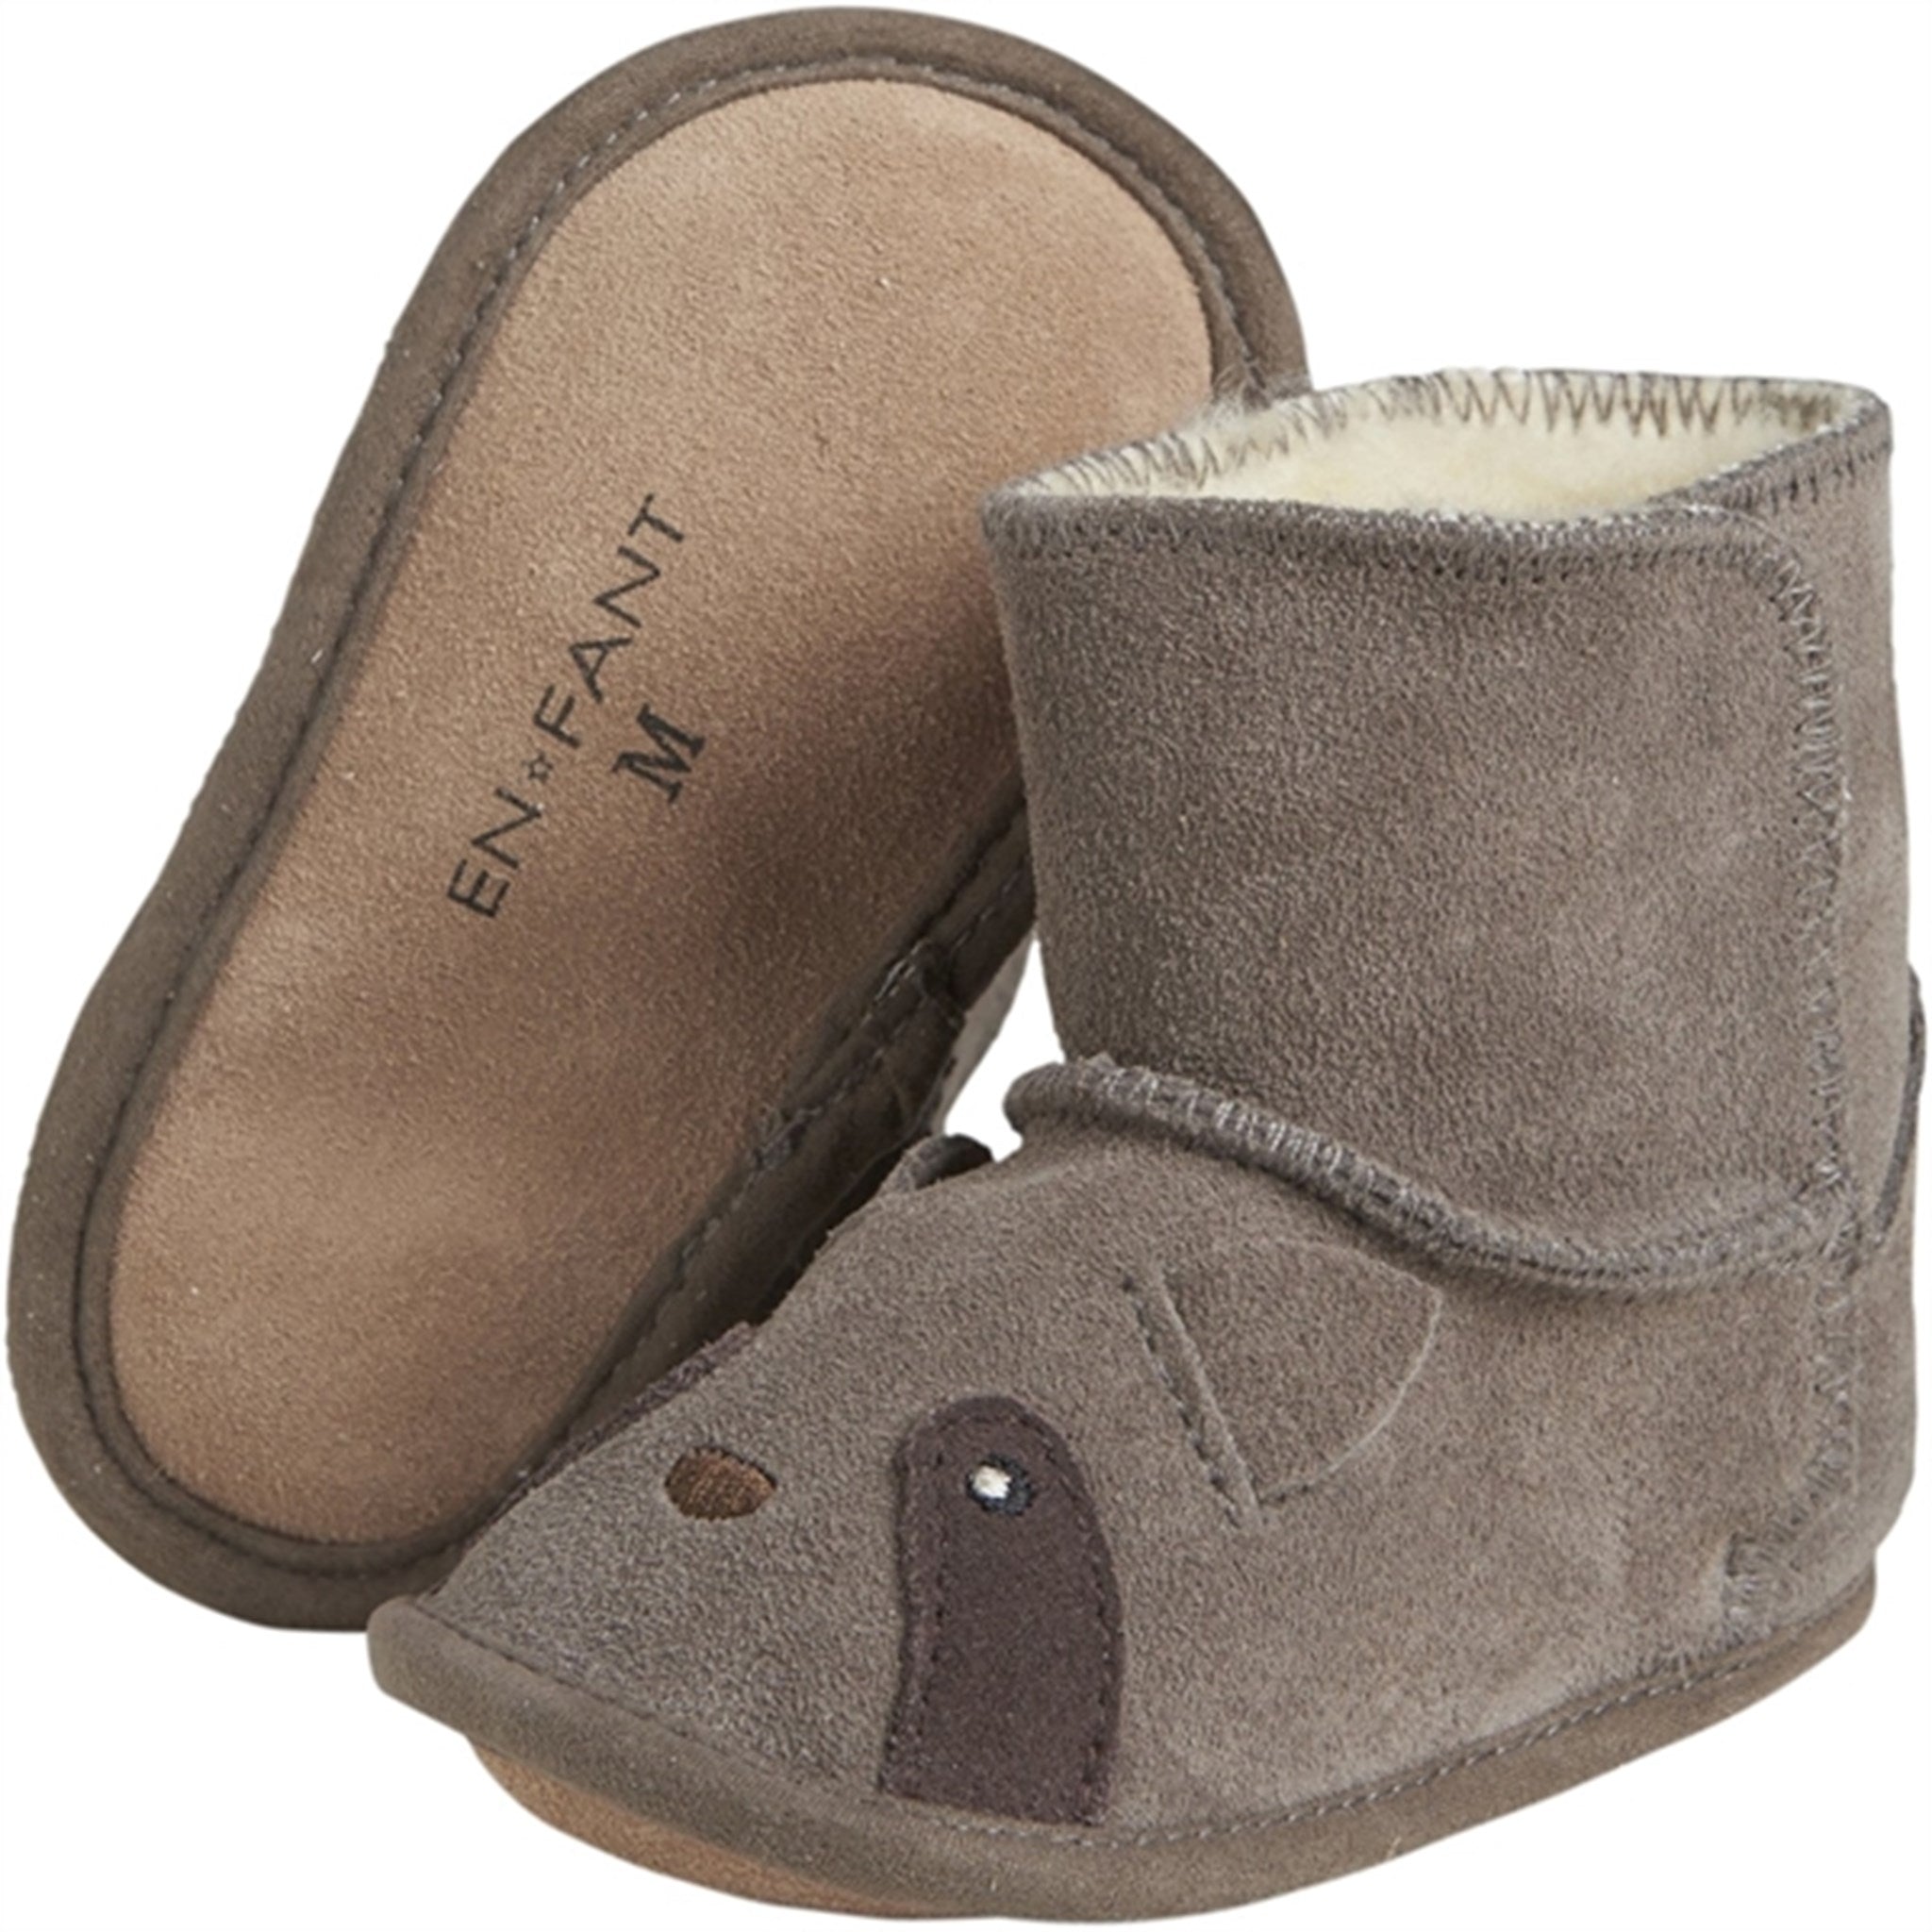 En Fant Teddy Boots Animal Chocolate Chip 4